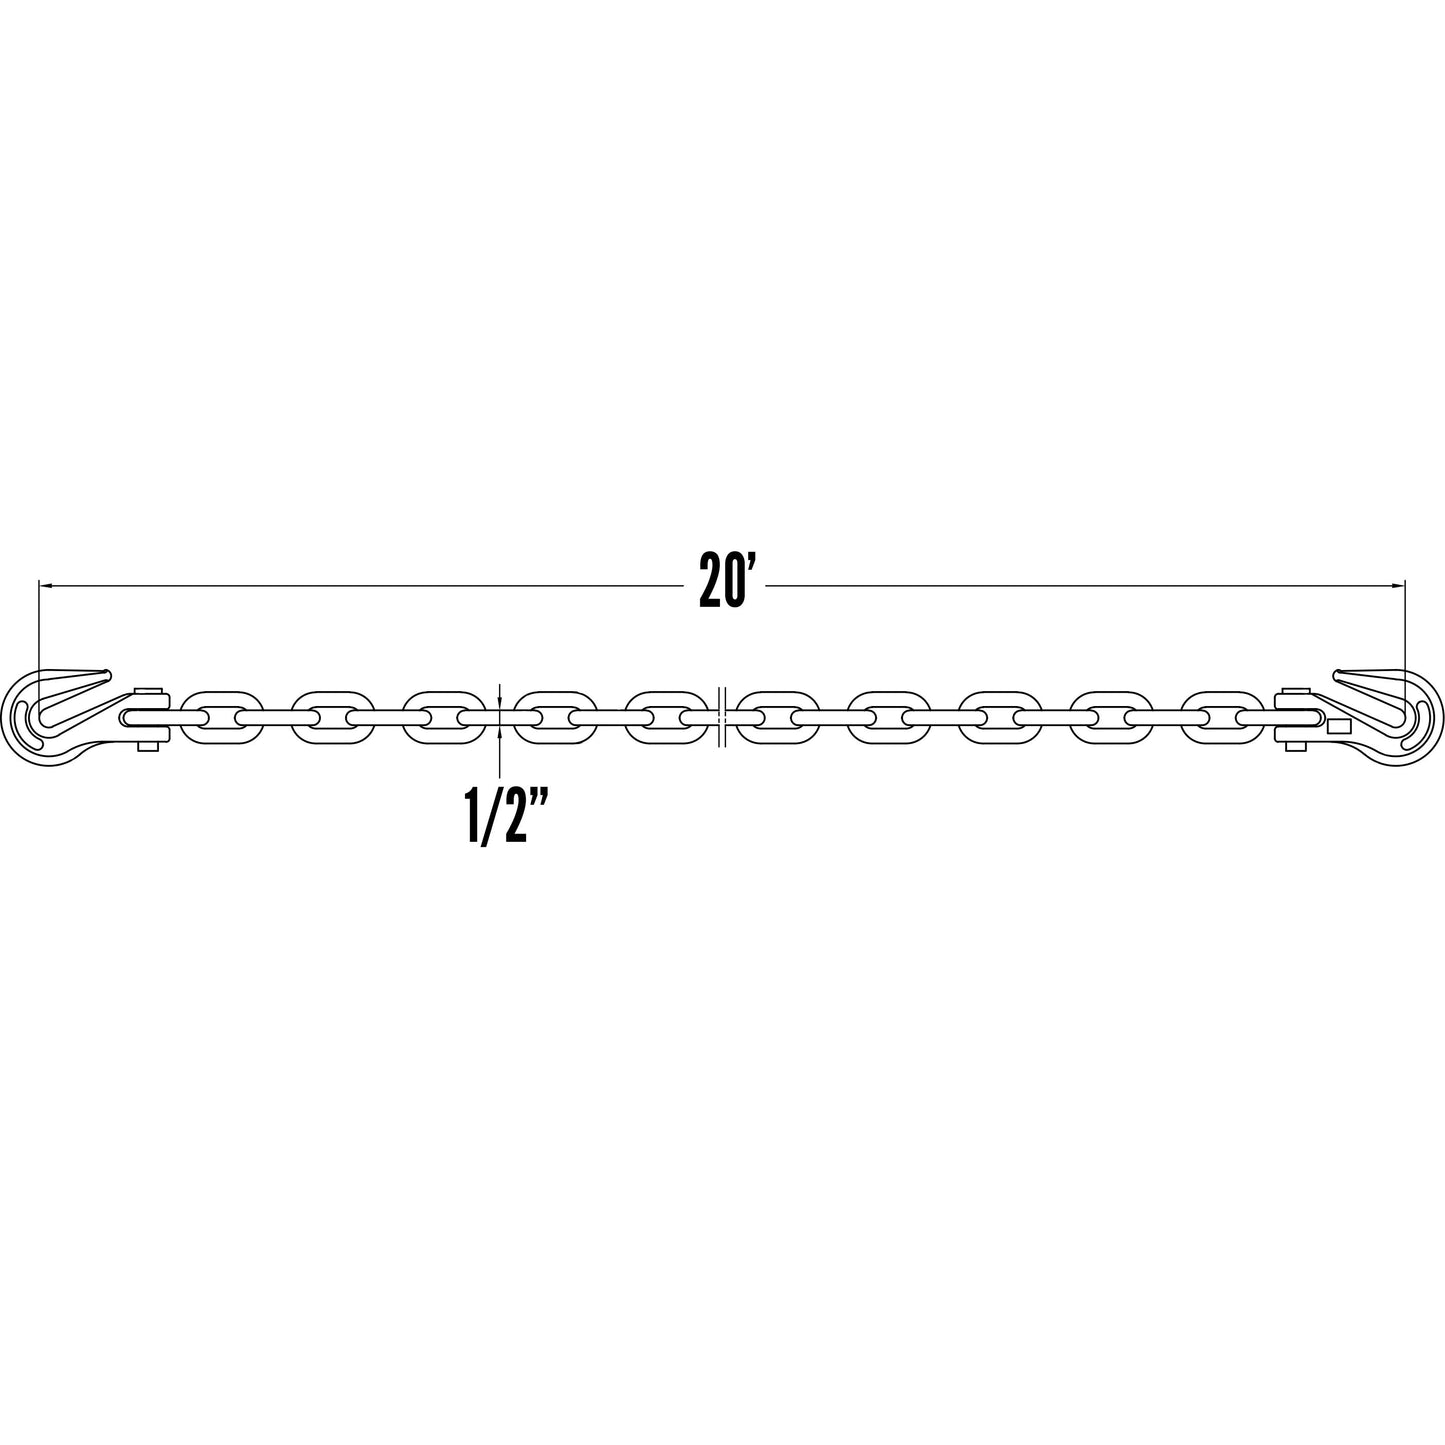 12 inch x 20 foot Transport Chain Grade 70 image 4 of 8